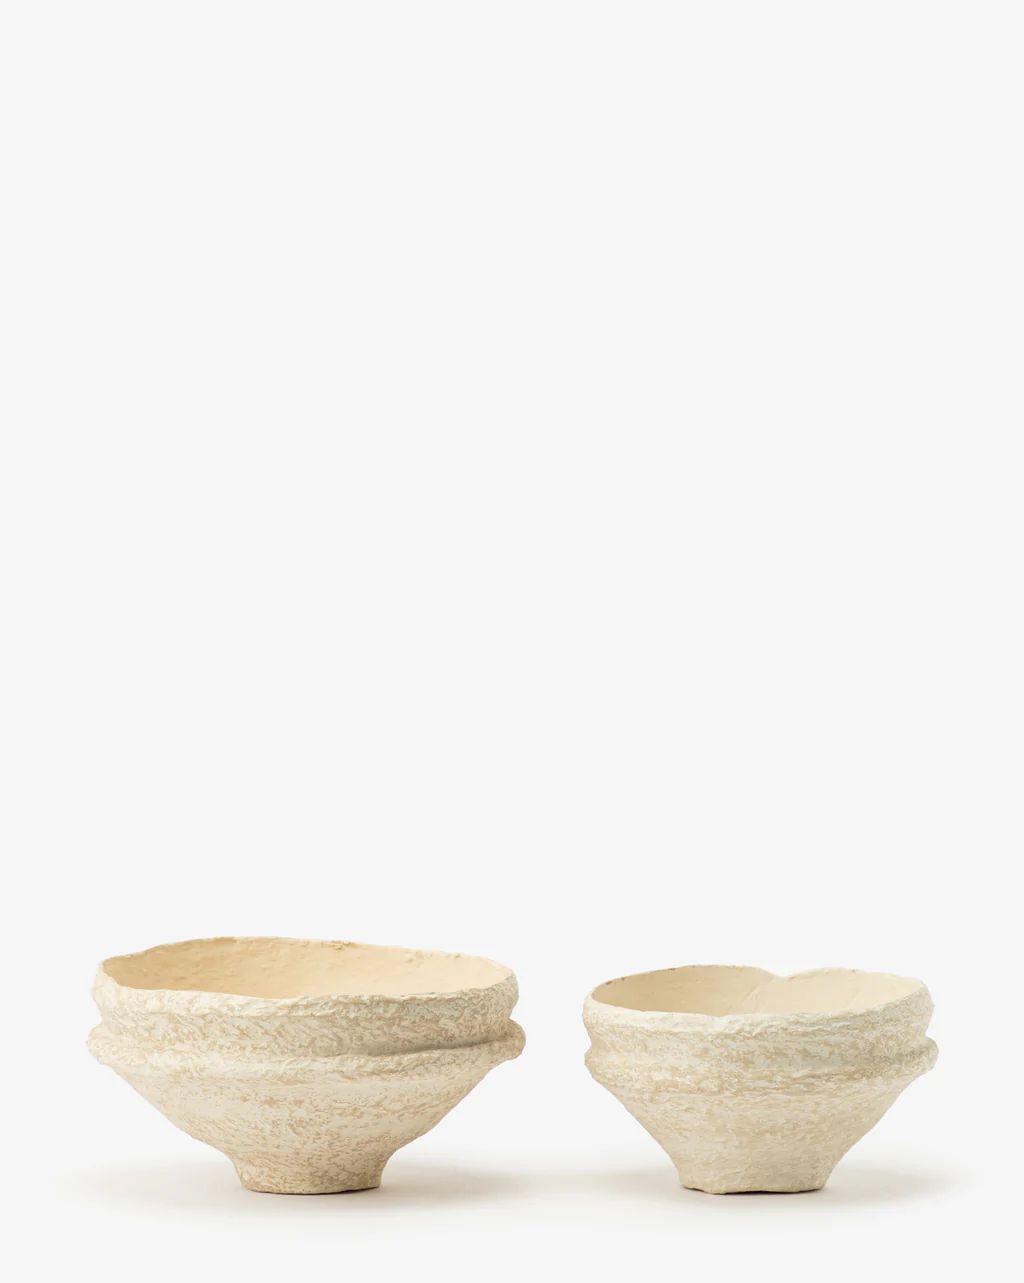 Paper Mache Crafted Bowl | McGee & Co.